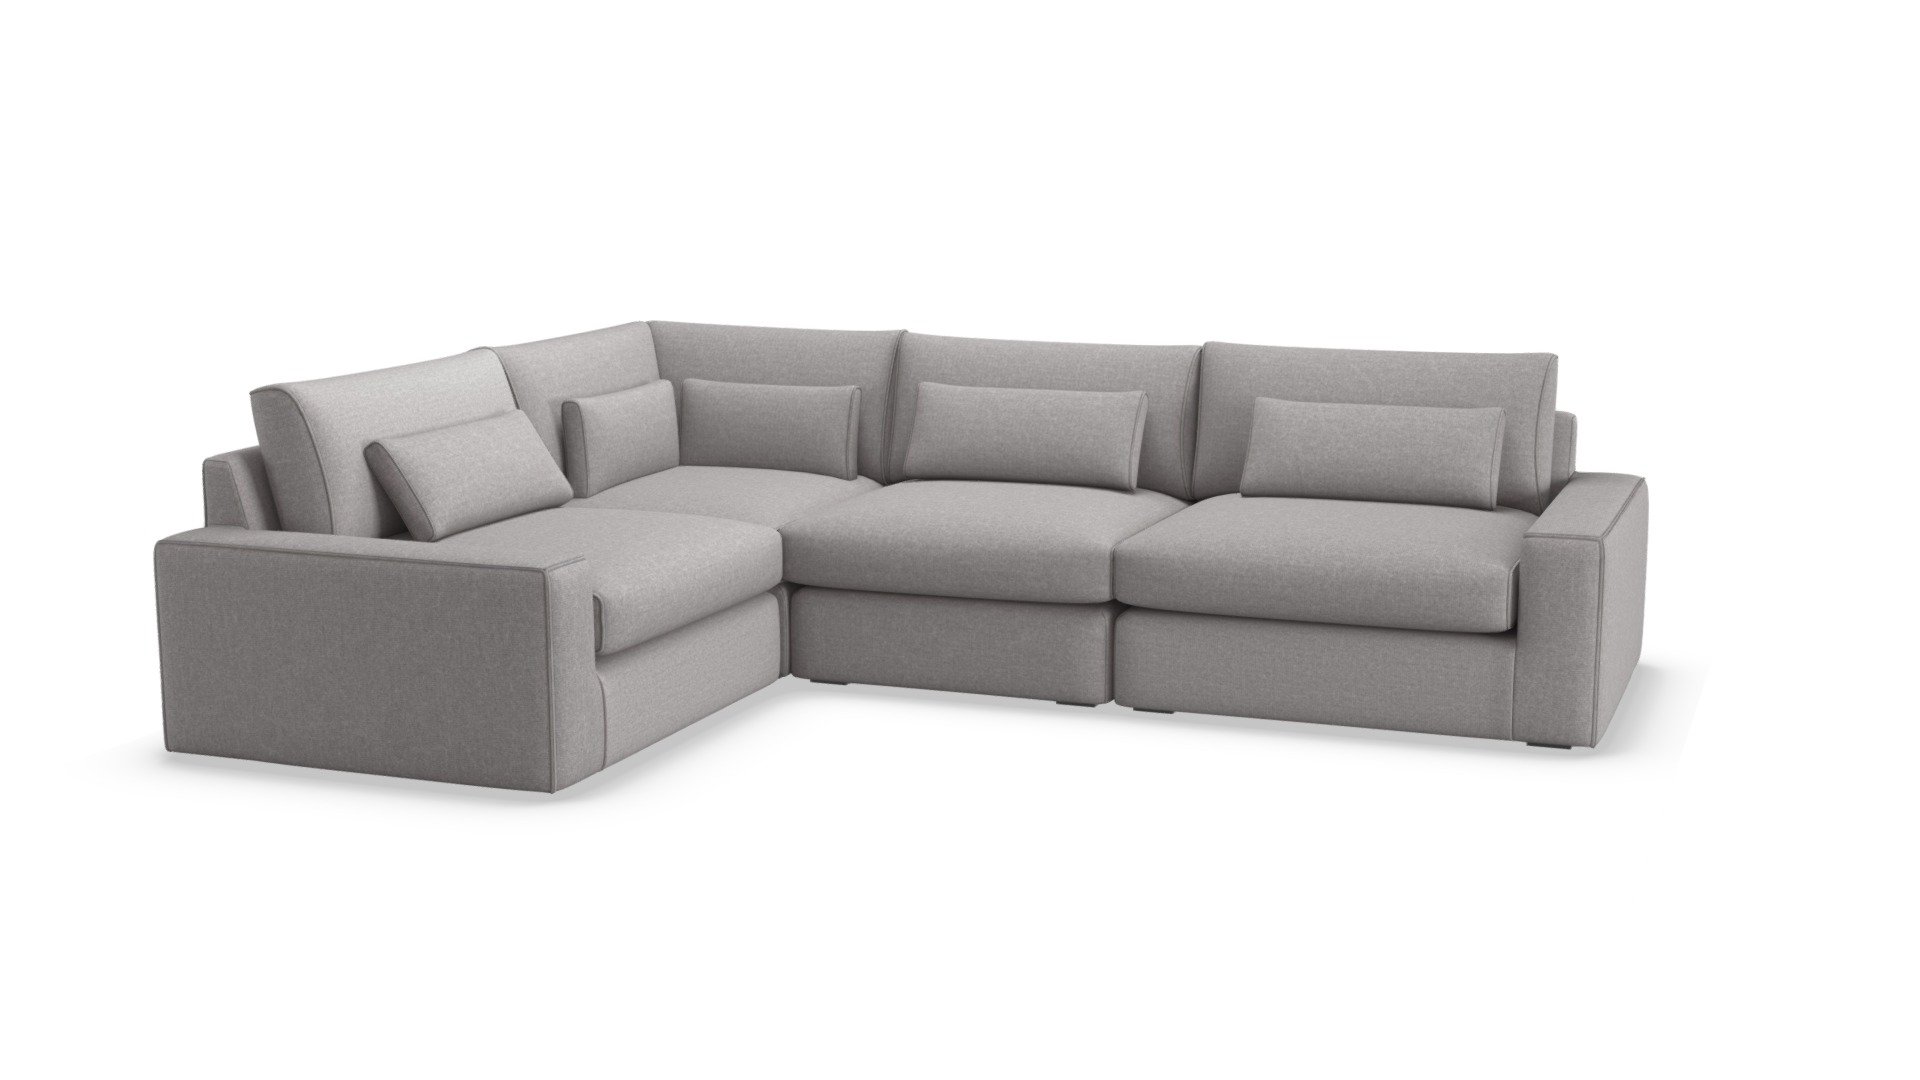 Trent Loose Cover Corner Sofa, Grey Cotton - 3D model by MADE.COM (@made-it) 3d model